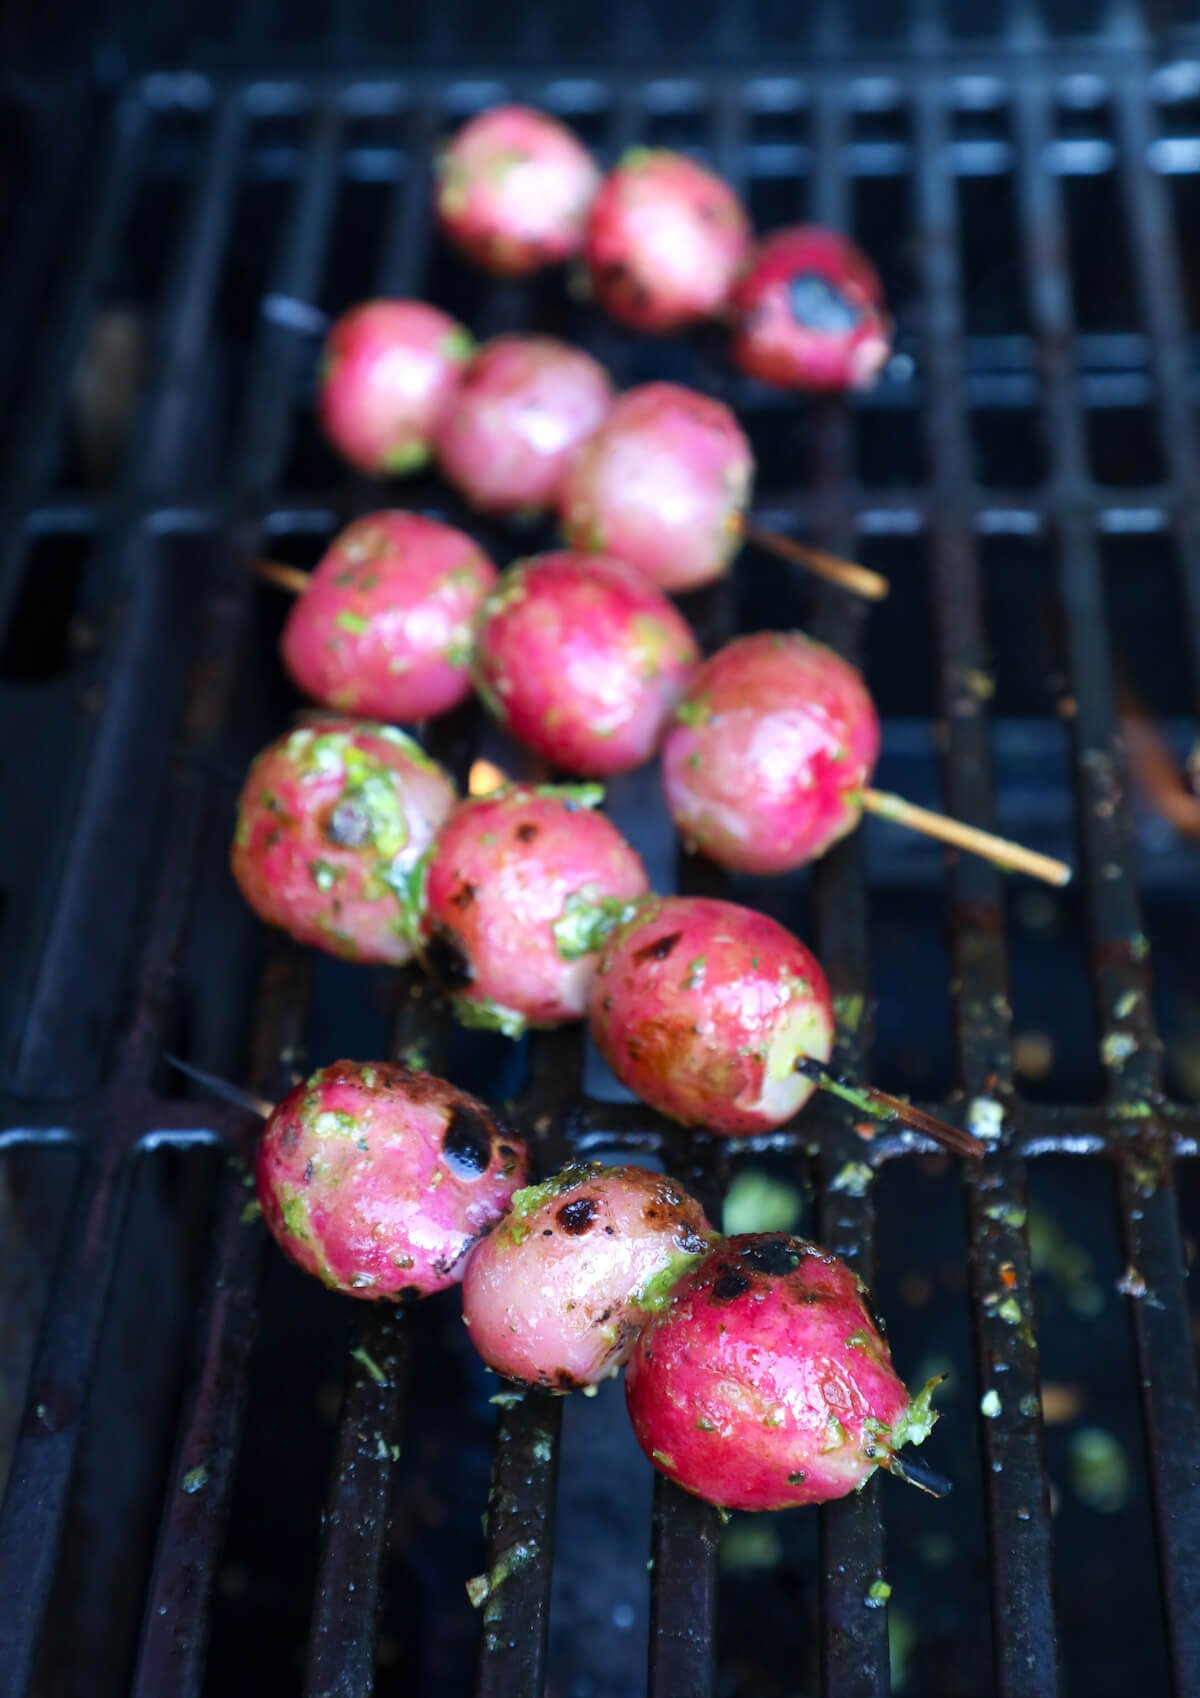 Radish Skewers on the grill, basted with herb butter